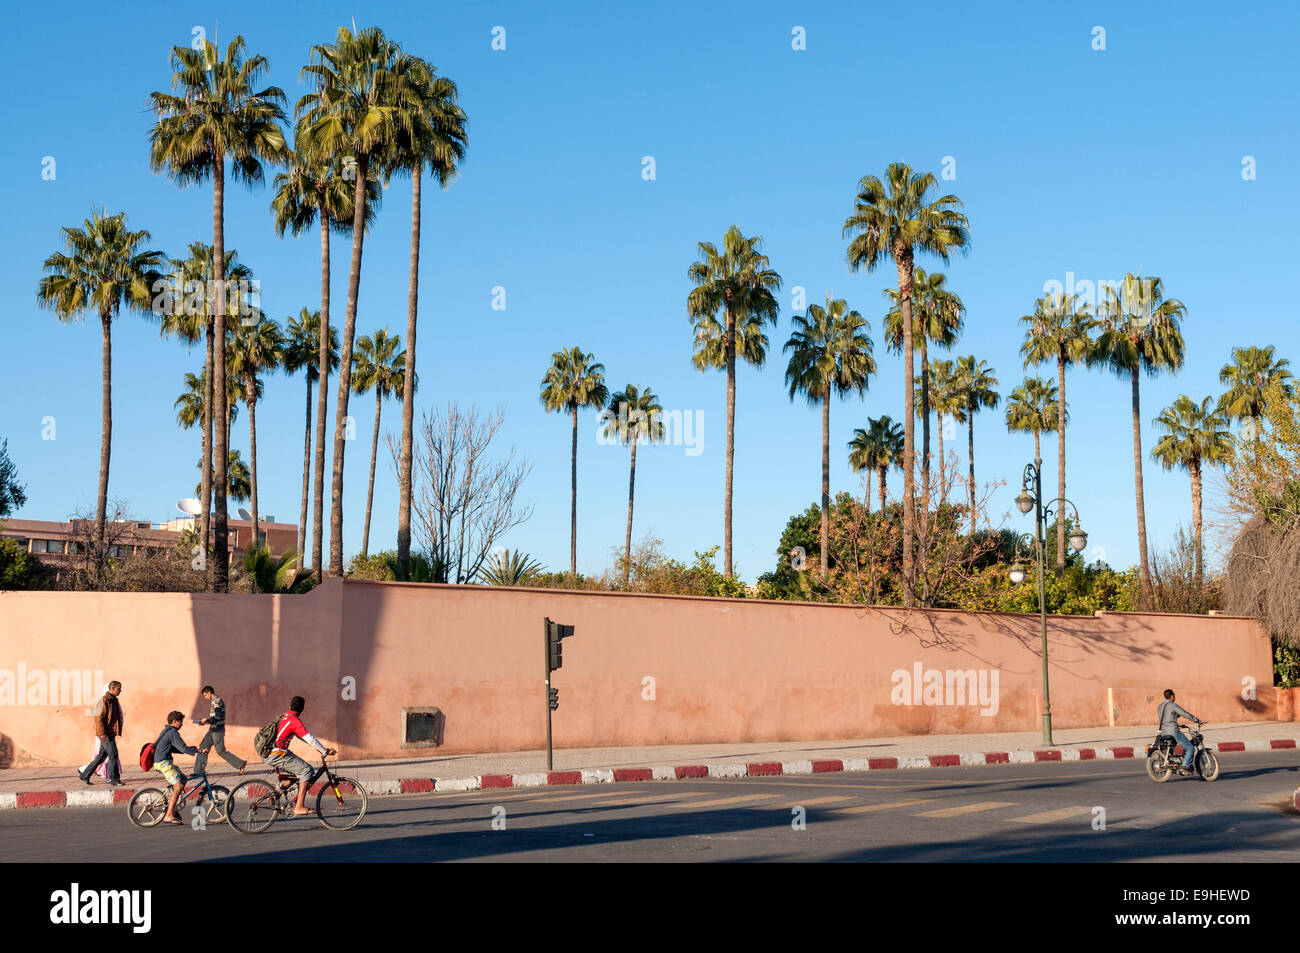 Old city wall and palm trees in Marrakesh. November 23, 2008 in Marrakesh, Morocco Stock Photo